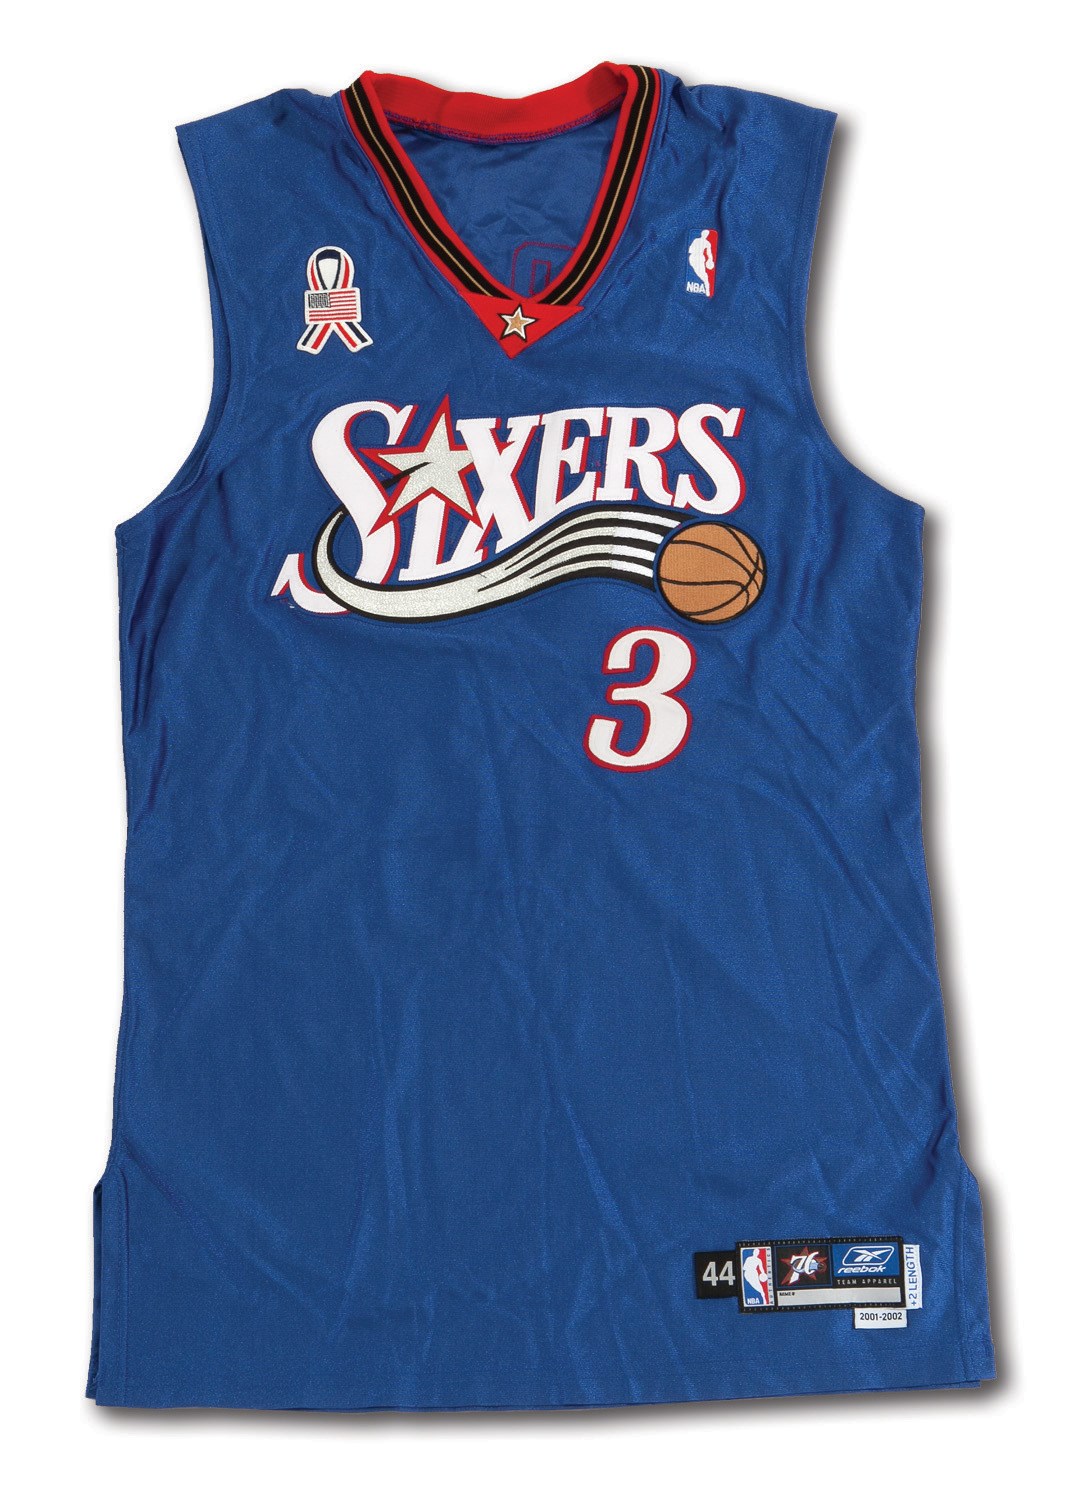 Lot Detail - 2002 Allen Iverson Number 6 NBA All-Star Game-Used